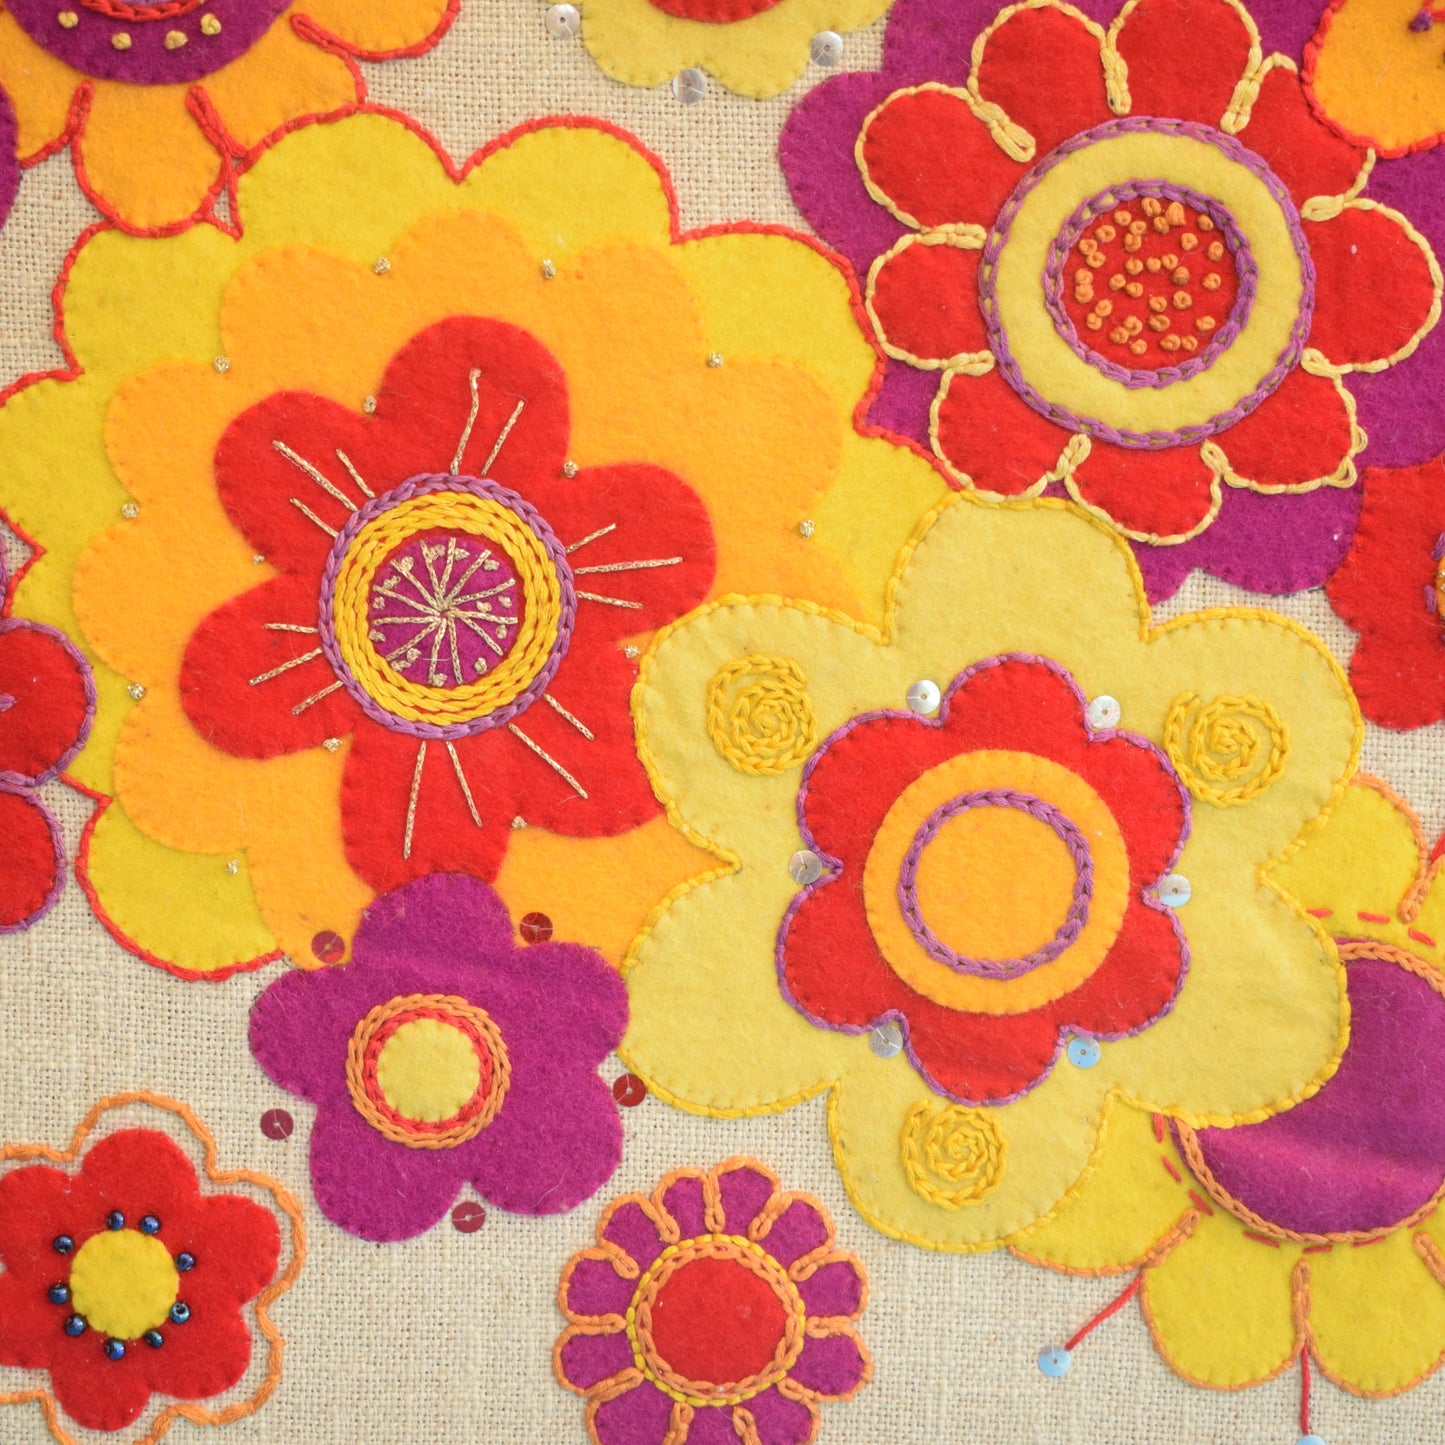 Vintage 1960s Embroidered Felt Picture - Flowers